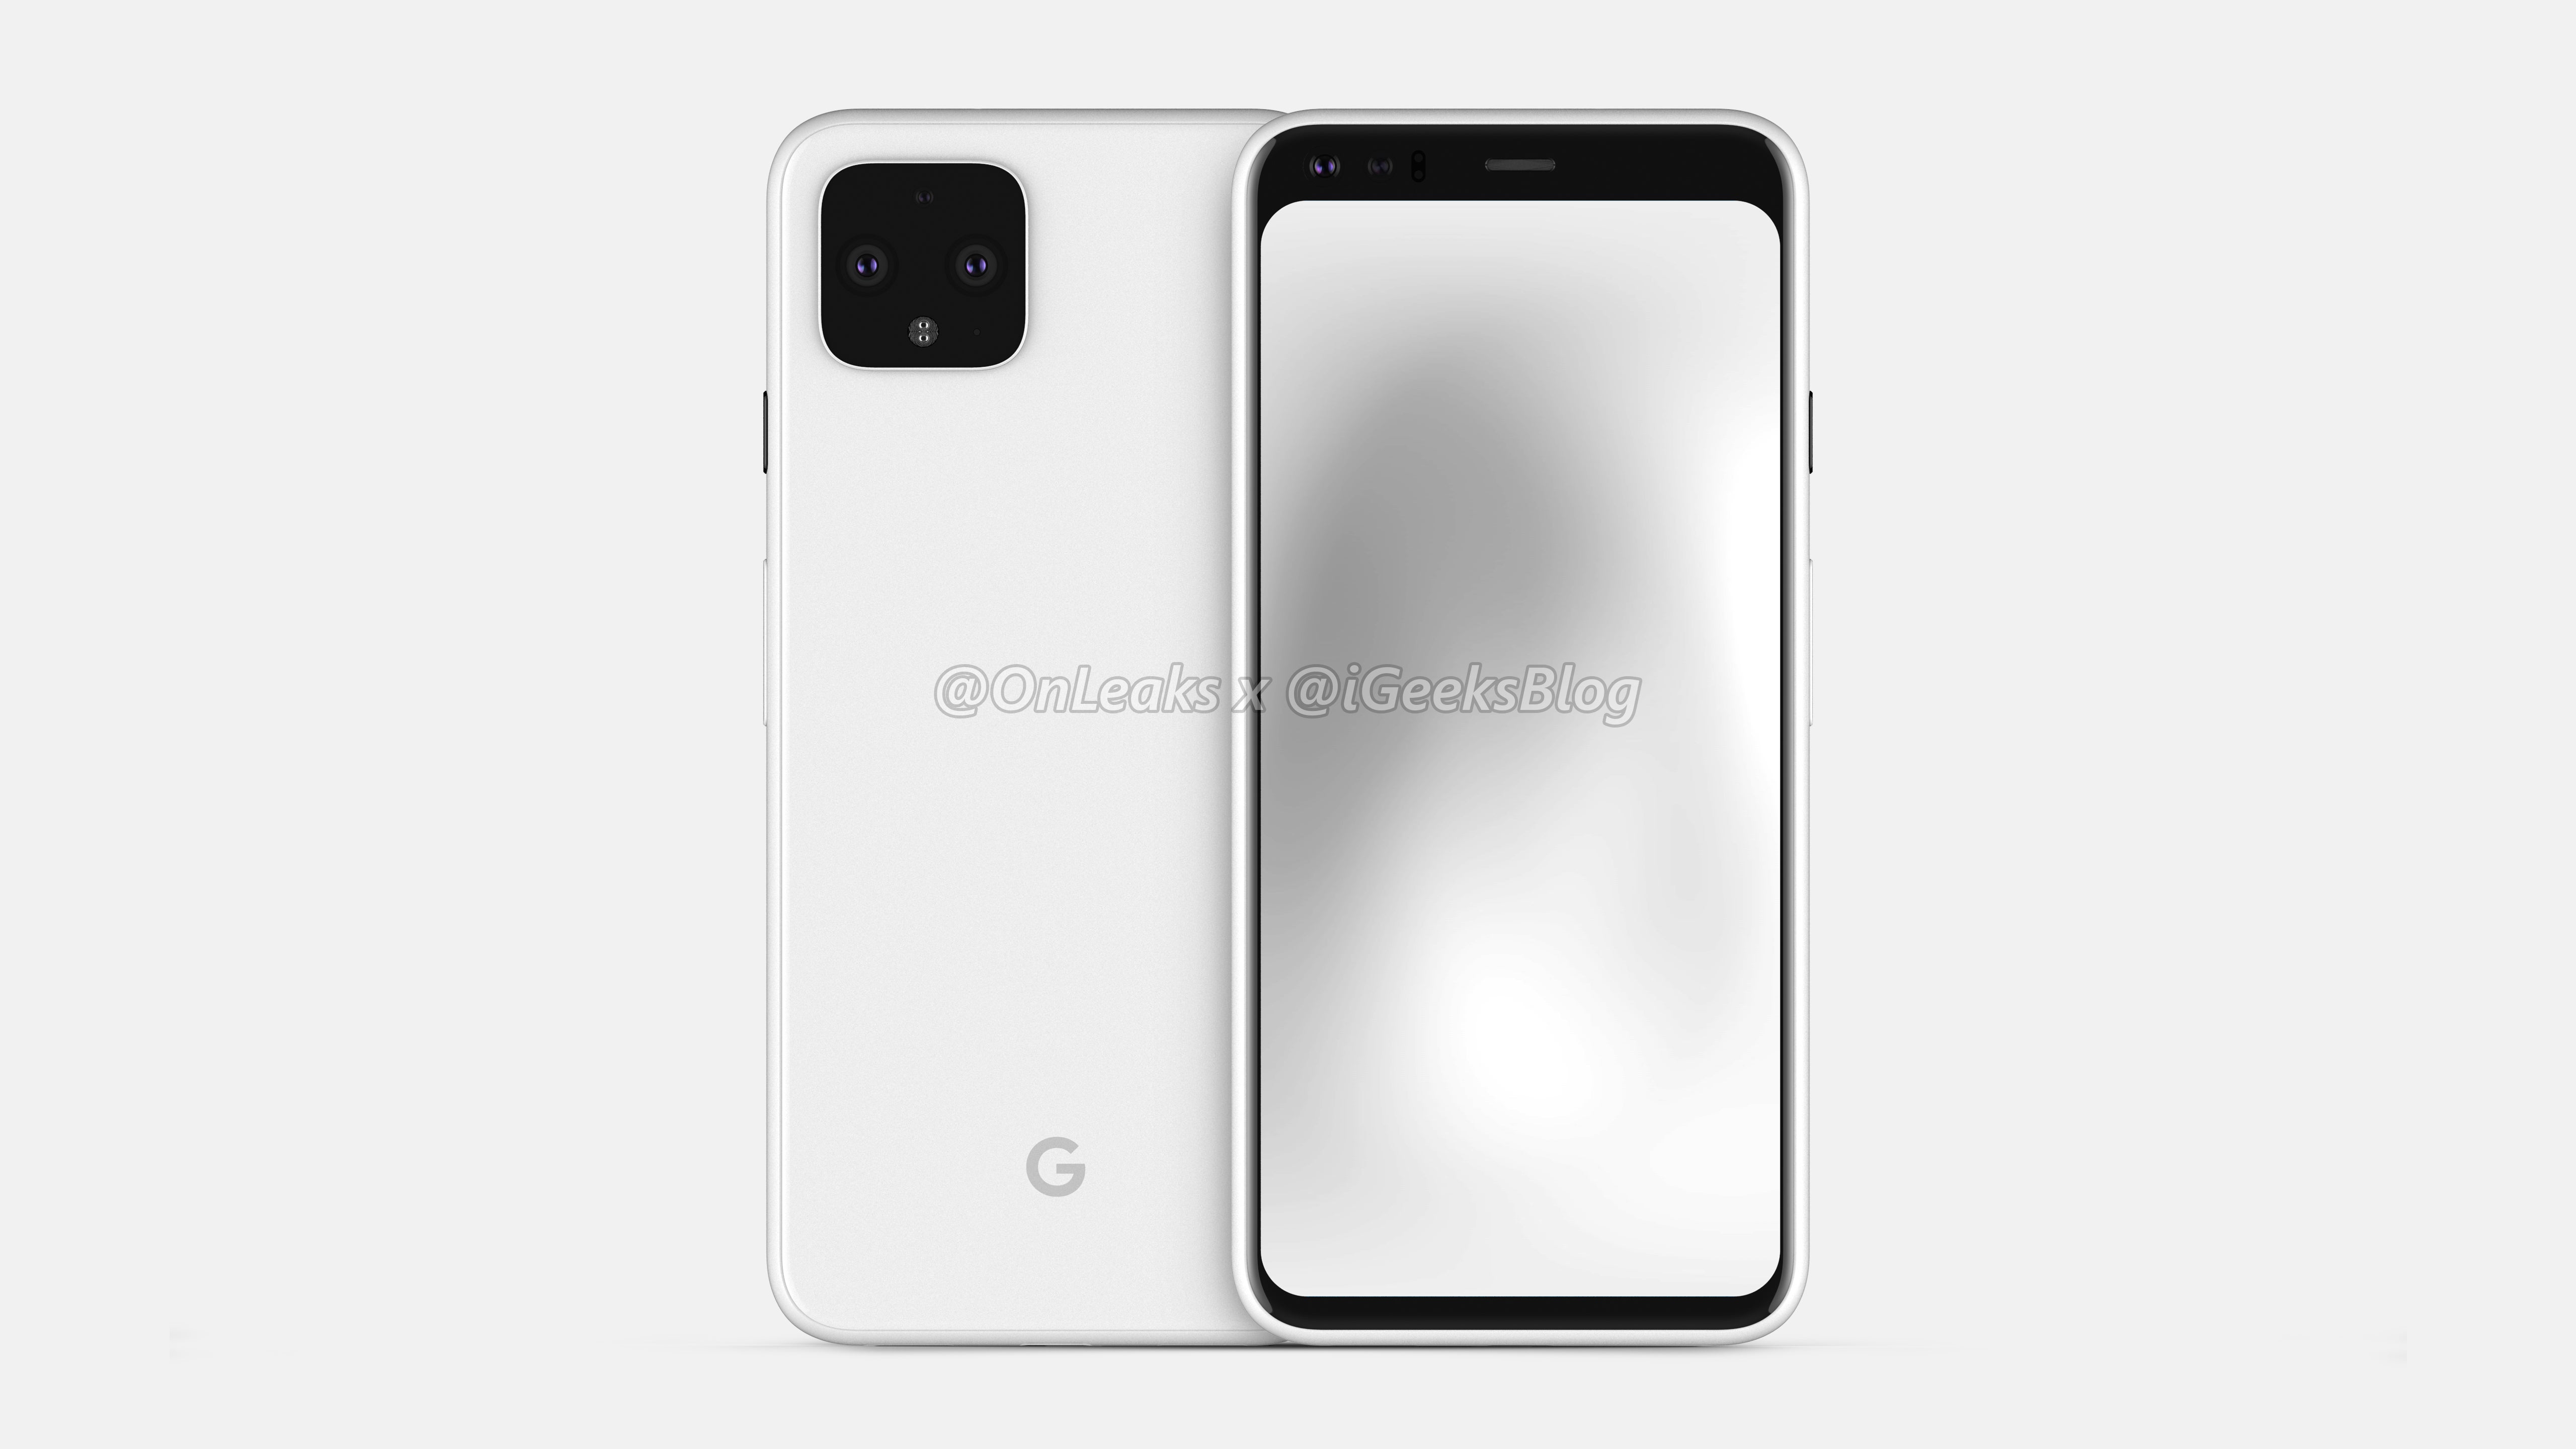 The latest render of the Google Pixel 4 - Check out the latest Google Pixel 4 renders